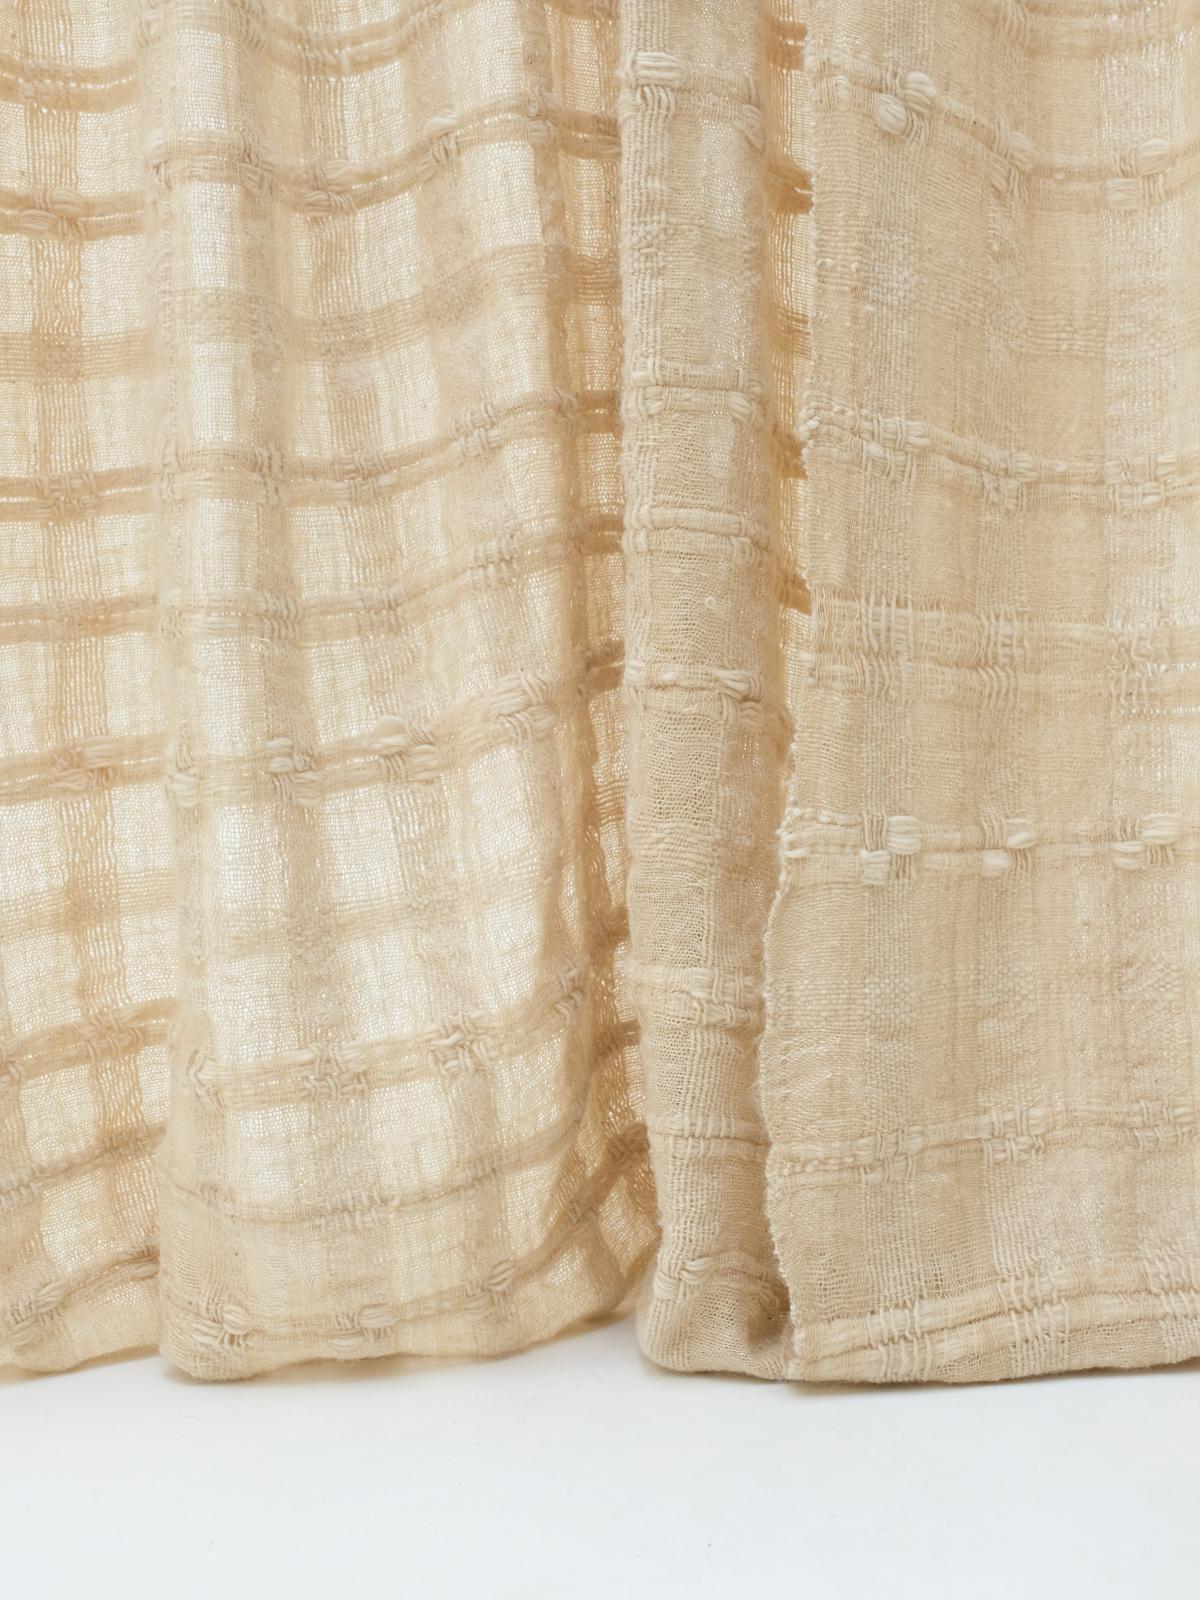 Contemporary Curtains Made of handspun and handwoven local Wool For Sale